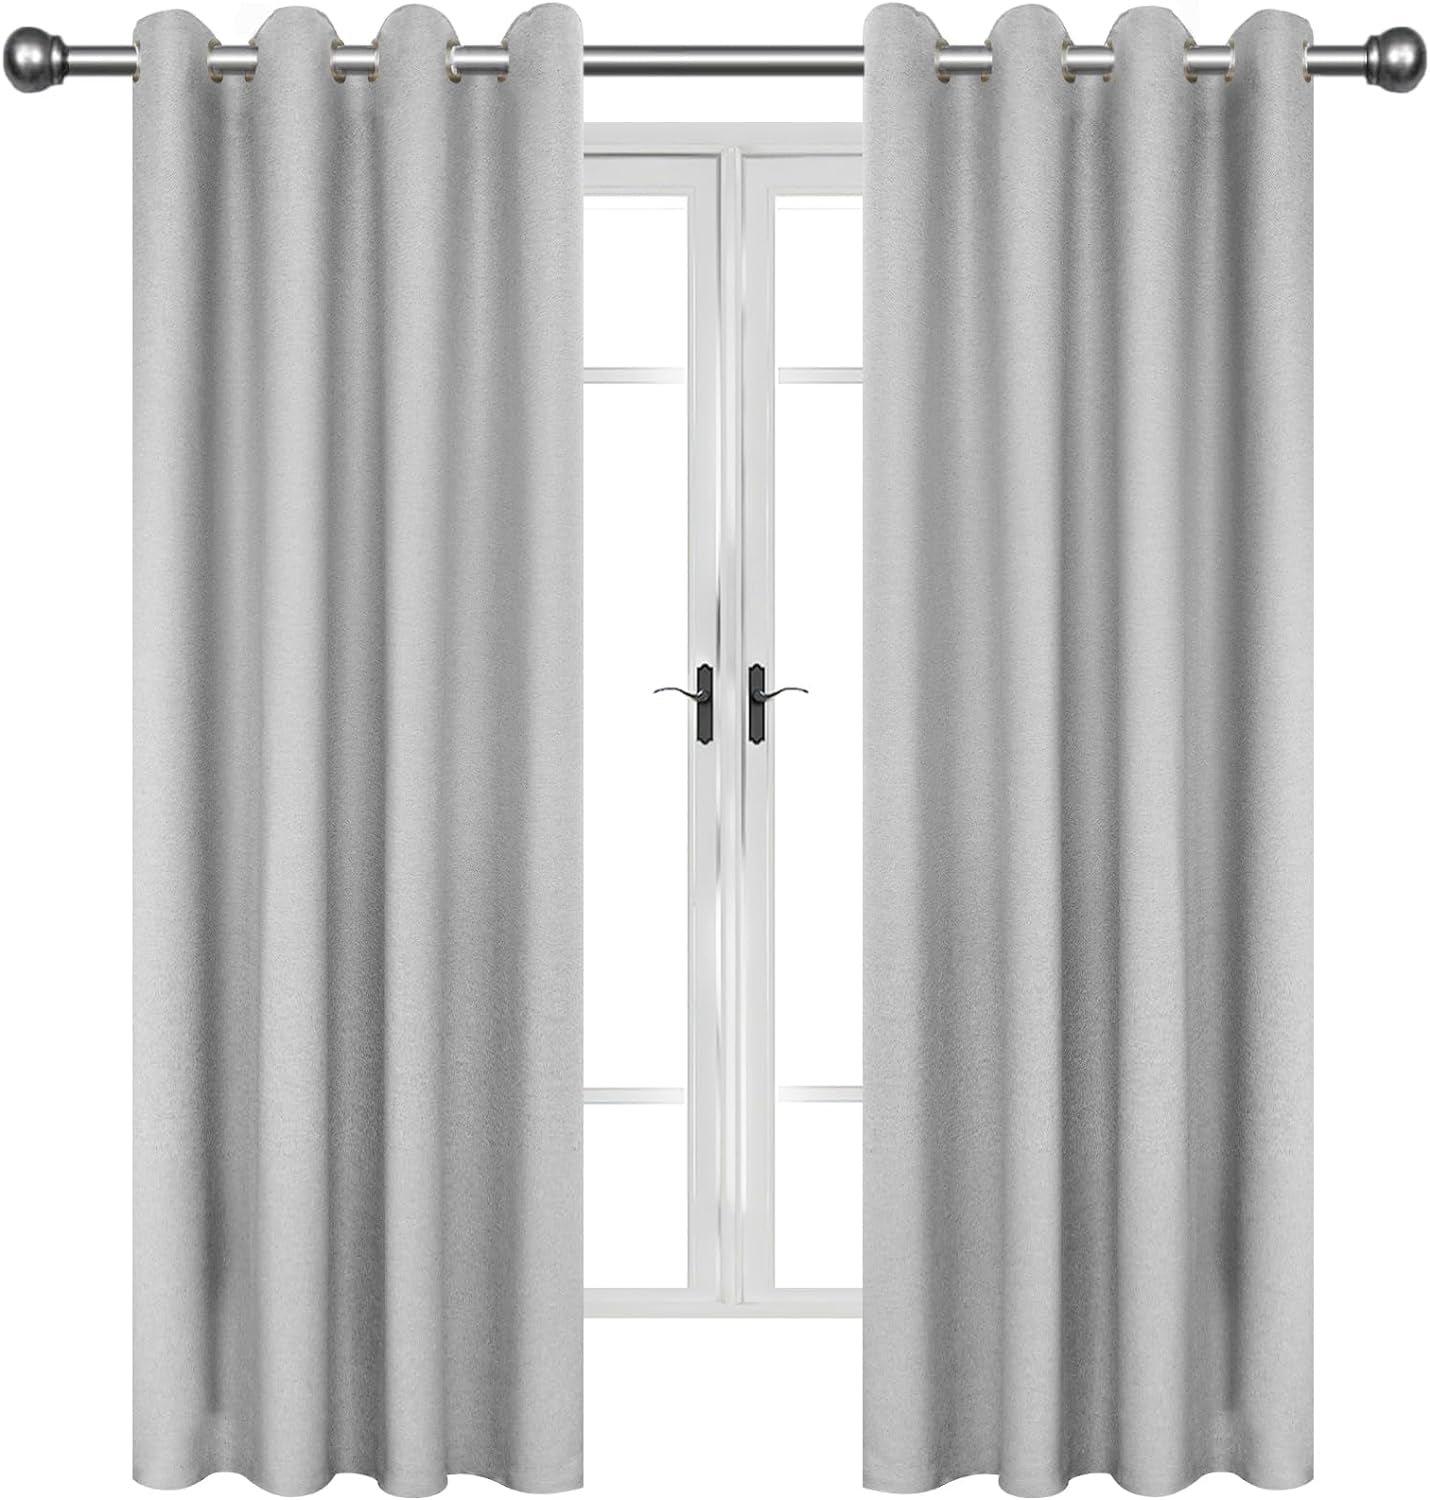 JIVINER Blackout Curtains 84 Inches Long Soundproof Thermal Insulated Curtains/Drapes/Panels for Kid'S Room (Baby Pink, W42 X L84,2 Panels)  JWN E-Commerce Linen Light Grey W42 X L63 ,2 Panels 